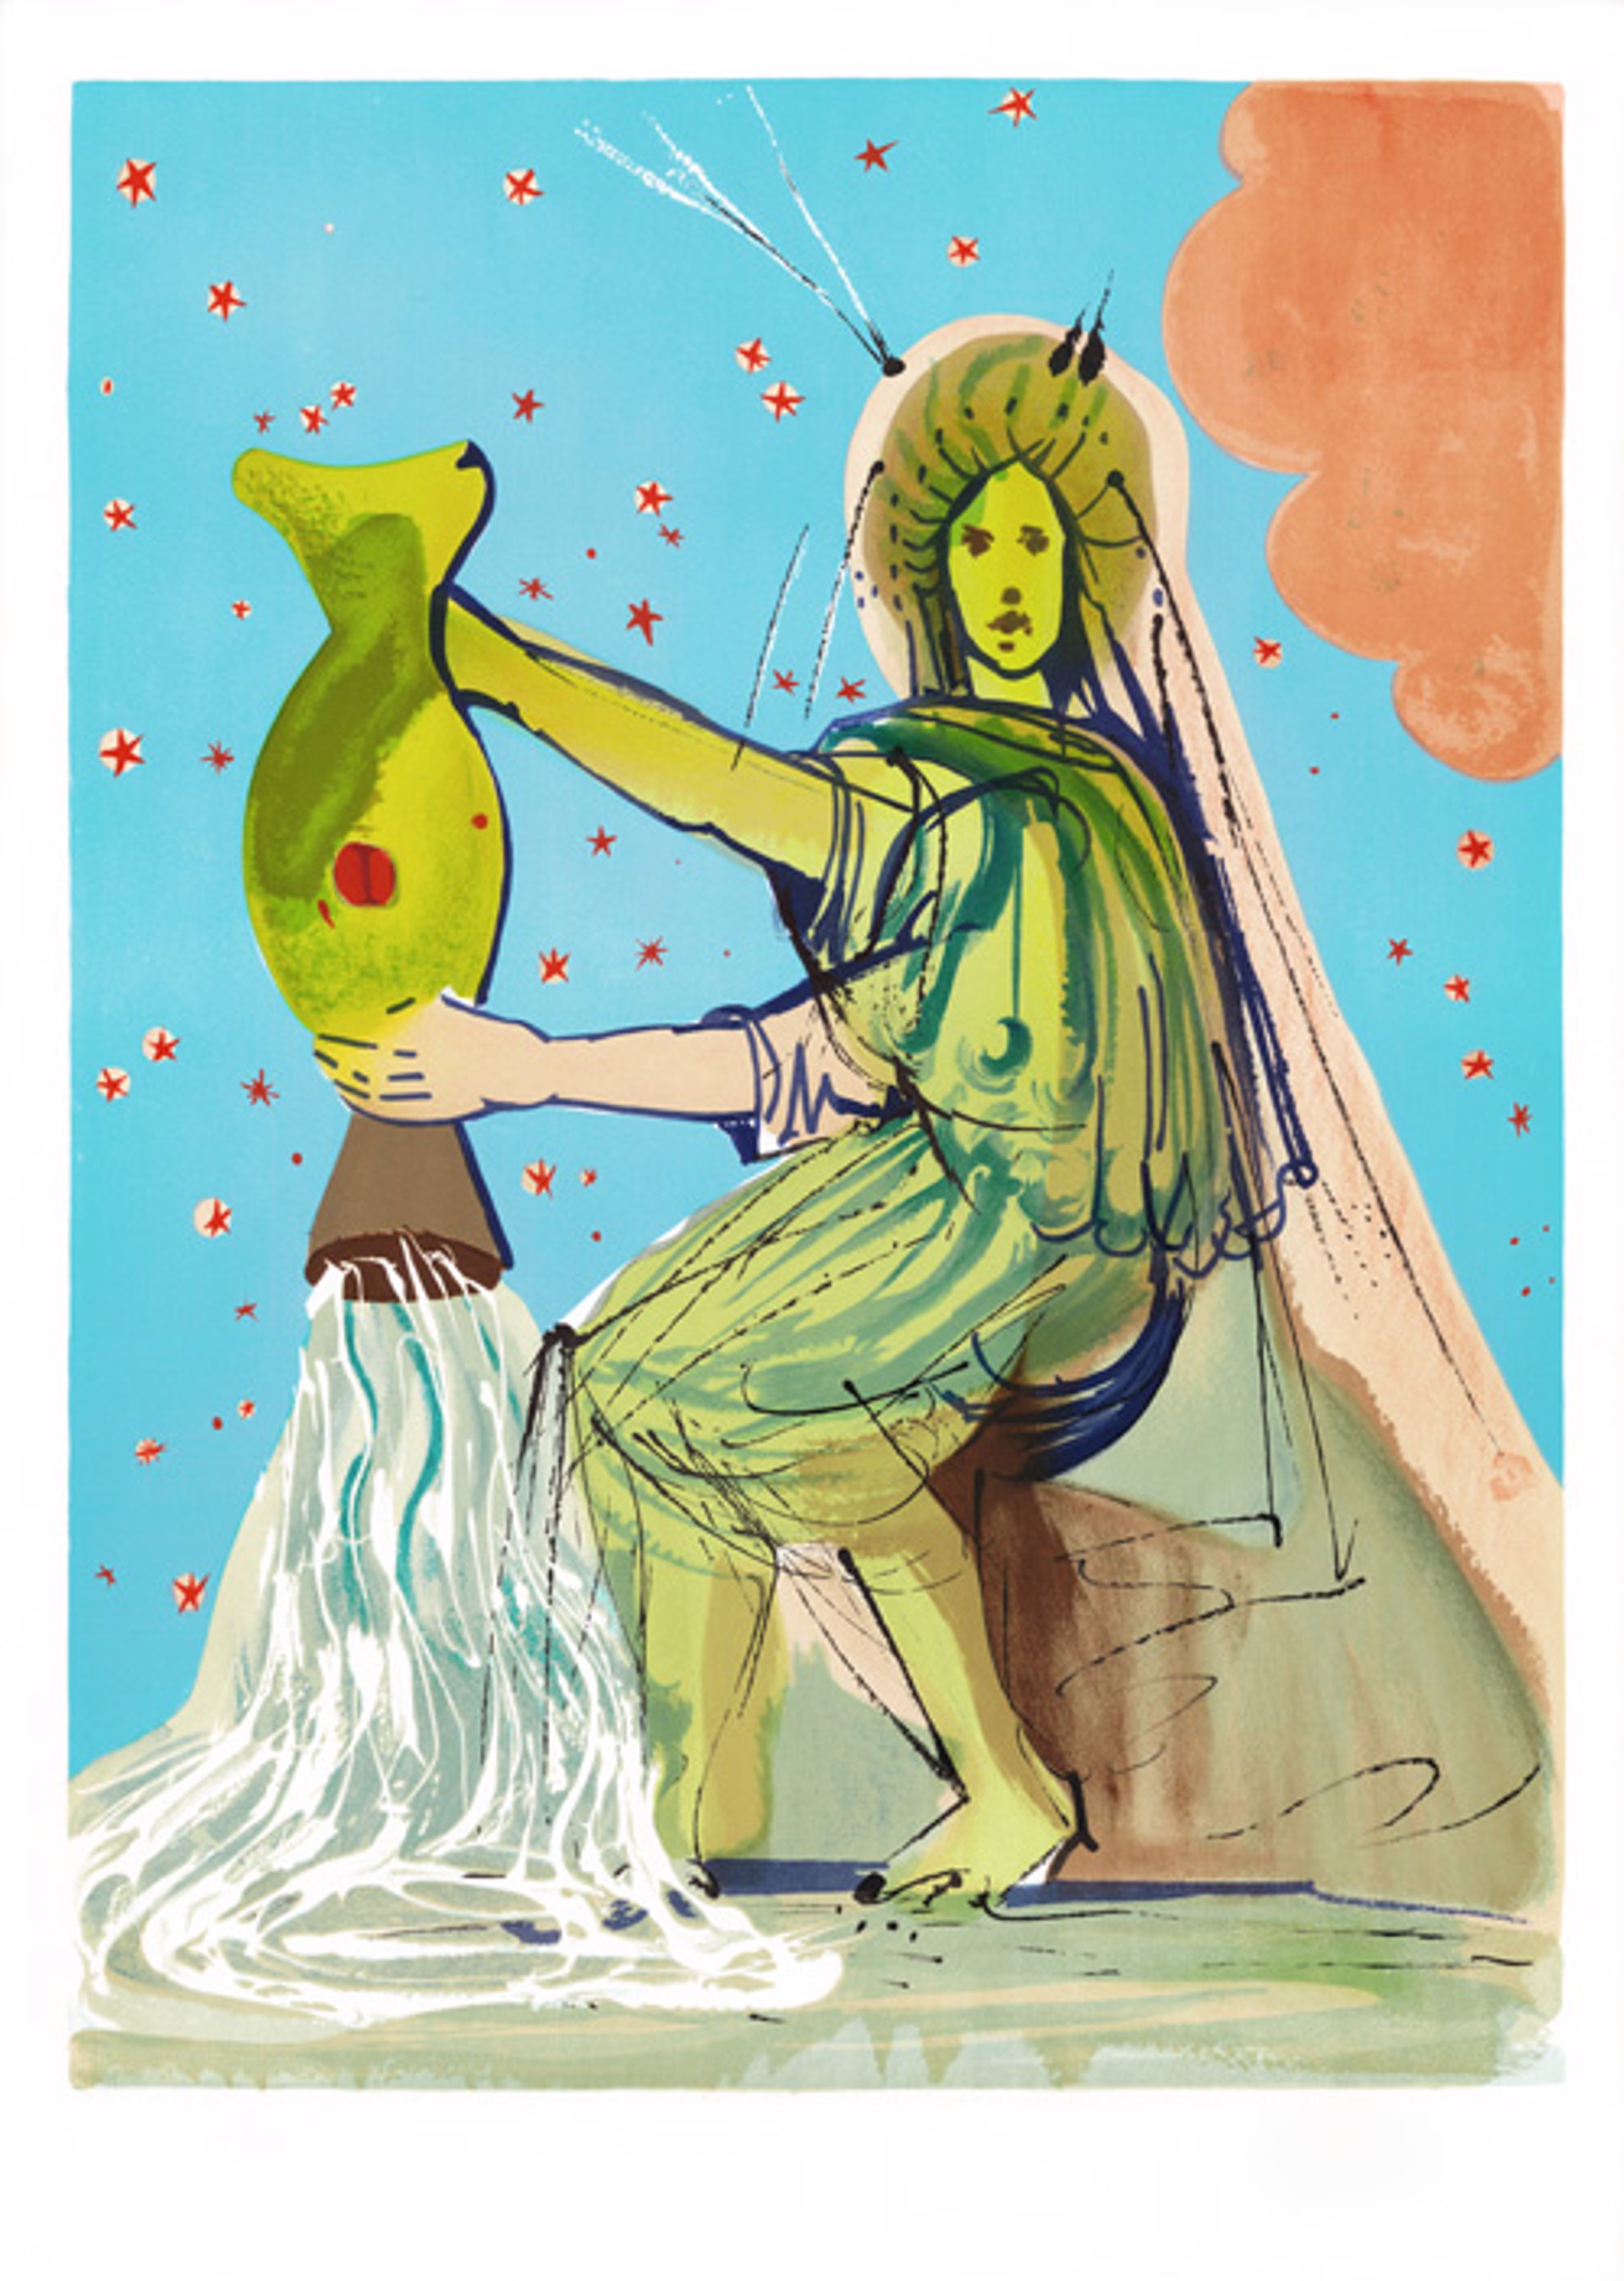 Aquarius From Signs of the Zodiac by Salvador Dali